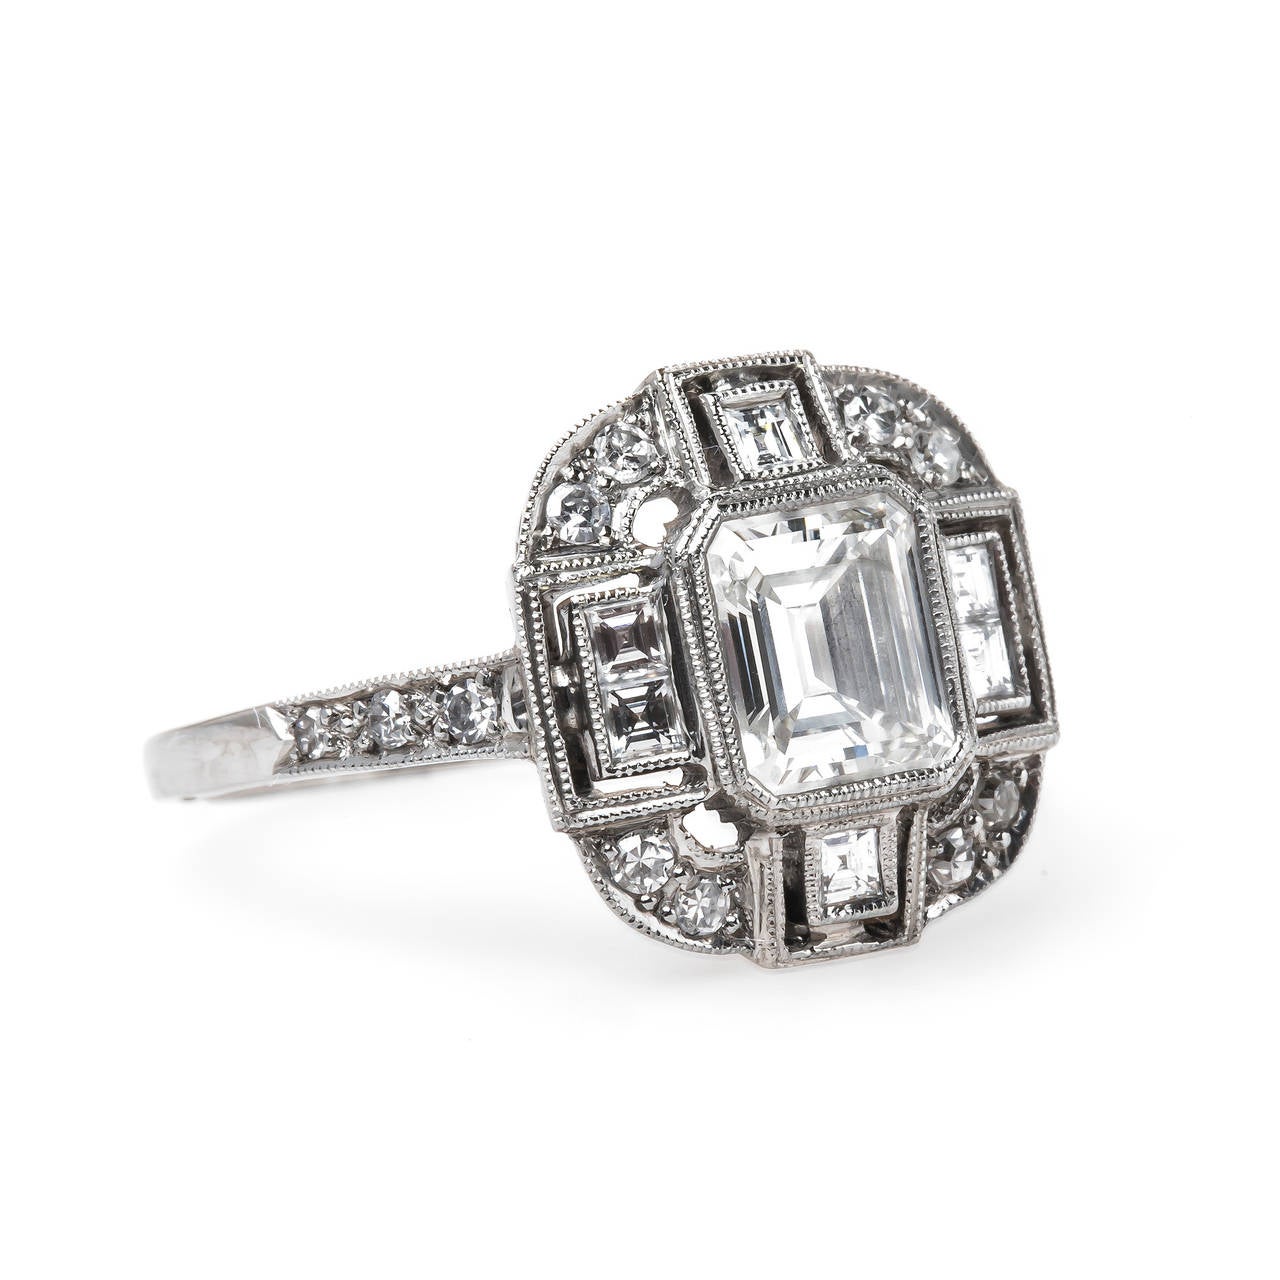 Hampstead Heath is an incredible Trumpet & Horn original design platinum engagement ring centering a high quality bezel set 1.01ct GIA certified Emerald Cut diamond graded G color and VVS2 clarity. Six square Step Cut diamonds frame each side of the